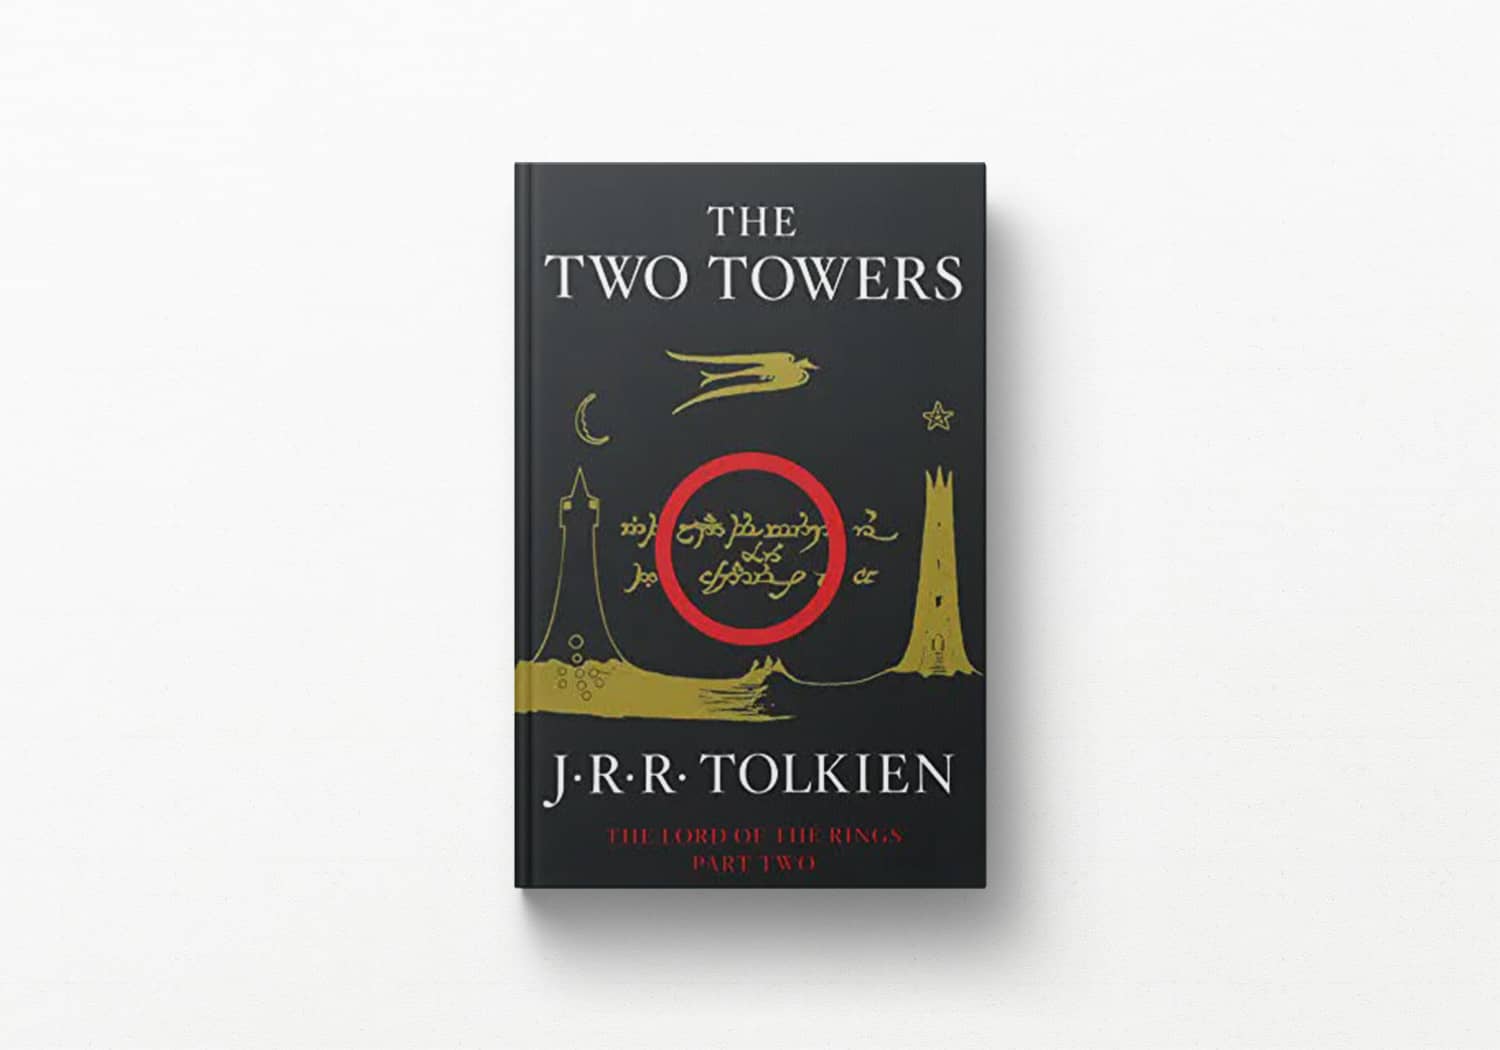 The Lord of the Rings: The Two Towers (extended edition) - Tolkien